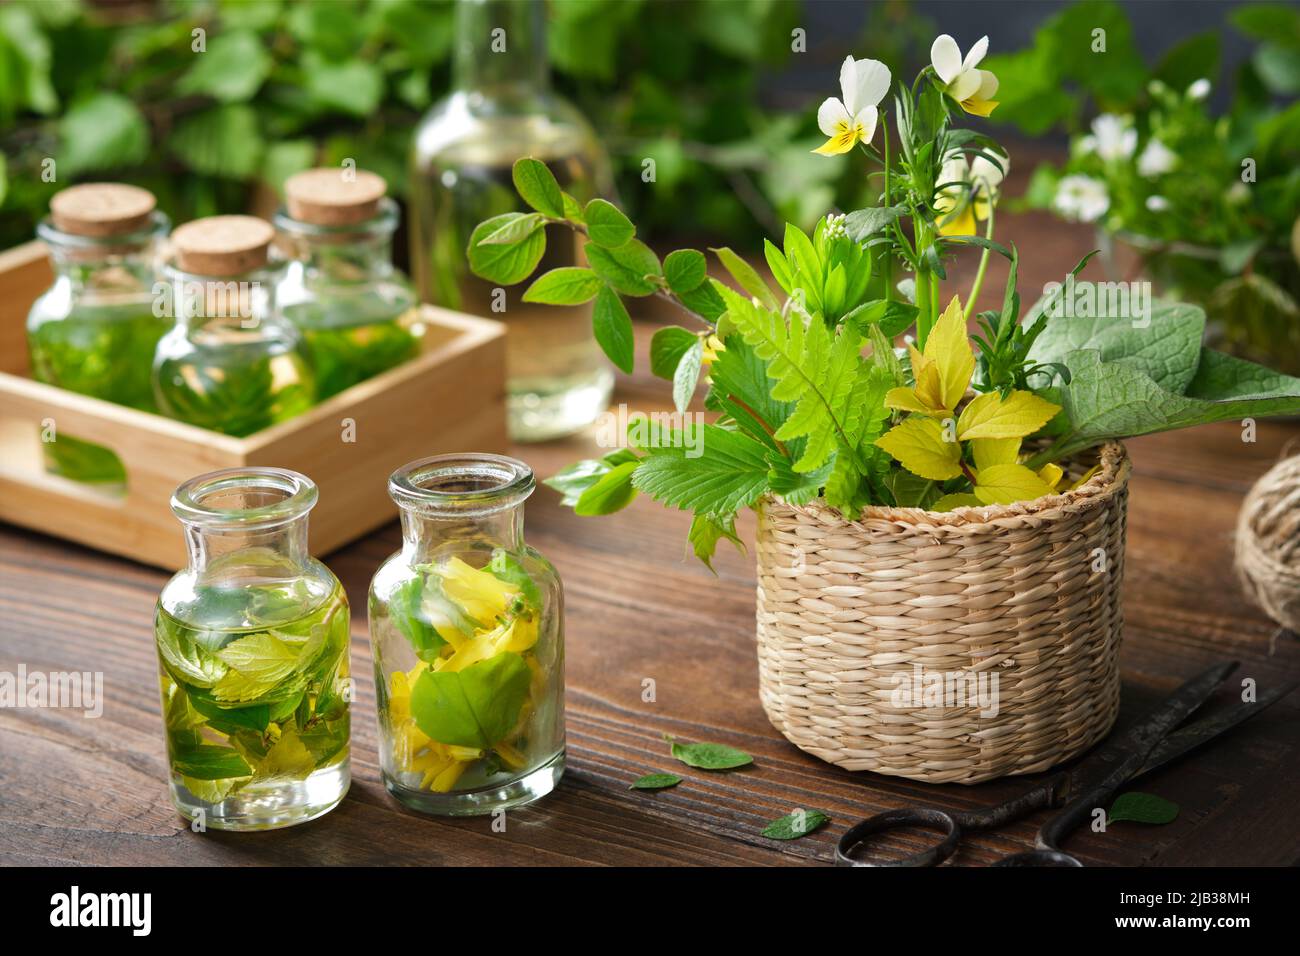 Bottles of essential oil, tincture or infusion of medicinal herbs and basket of medicinal healing plants. Alternative herbal medicine. Stock Photo